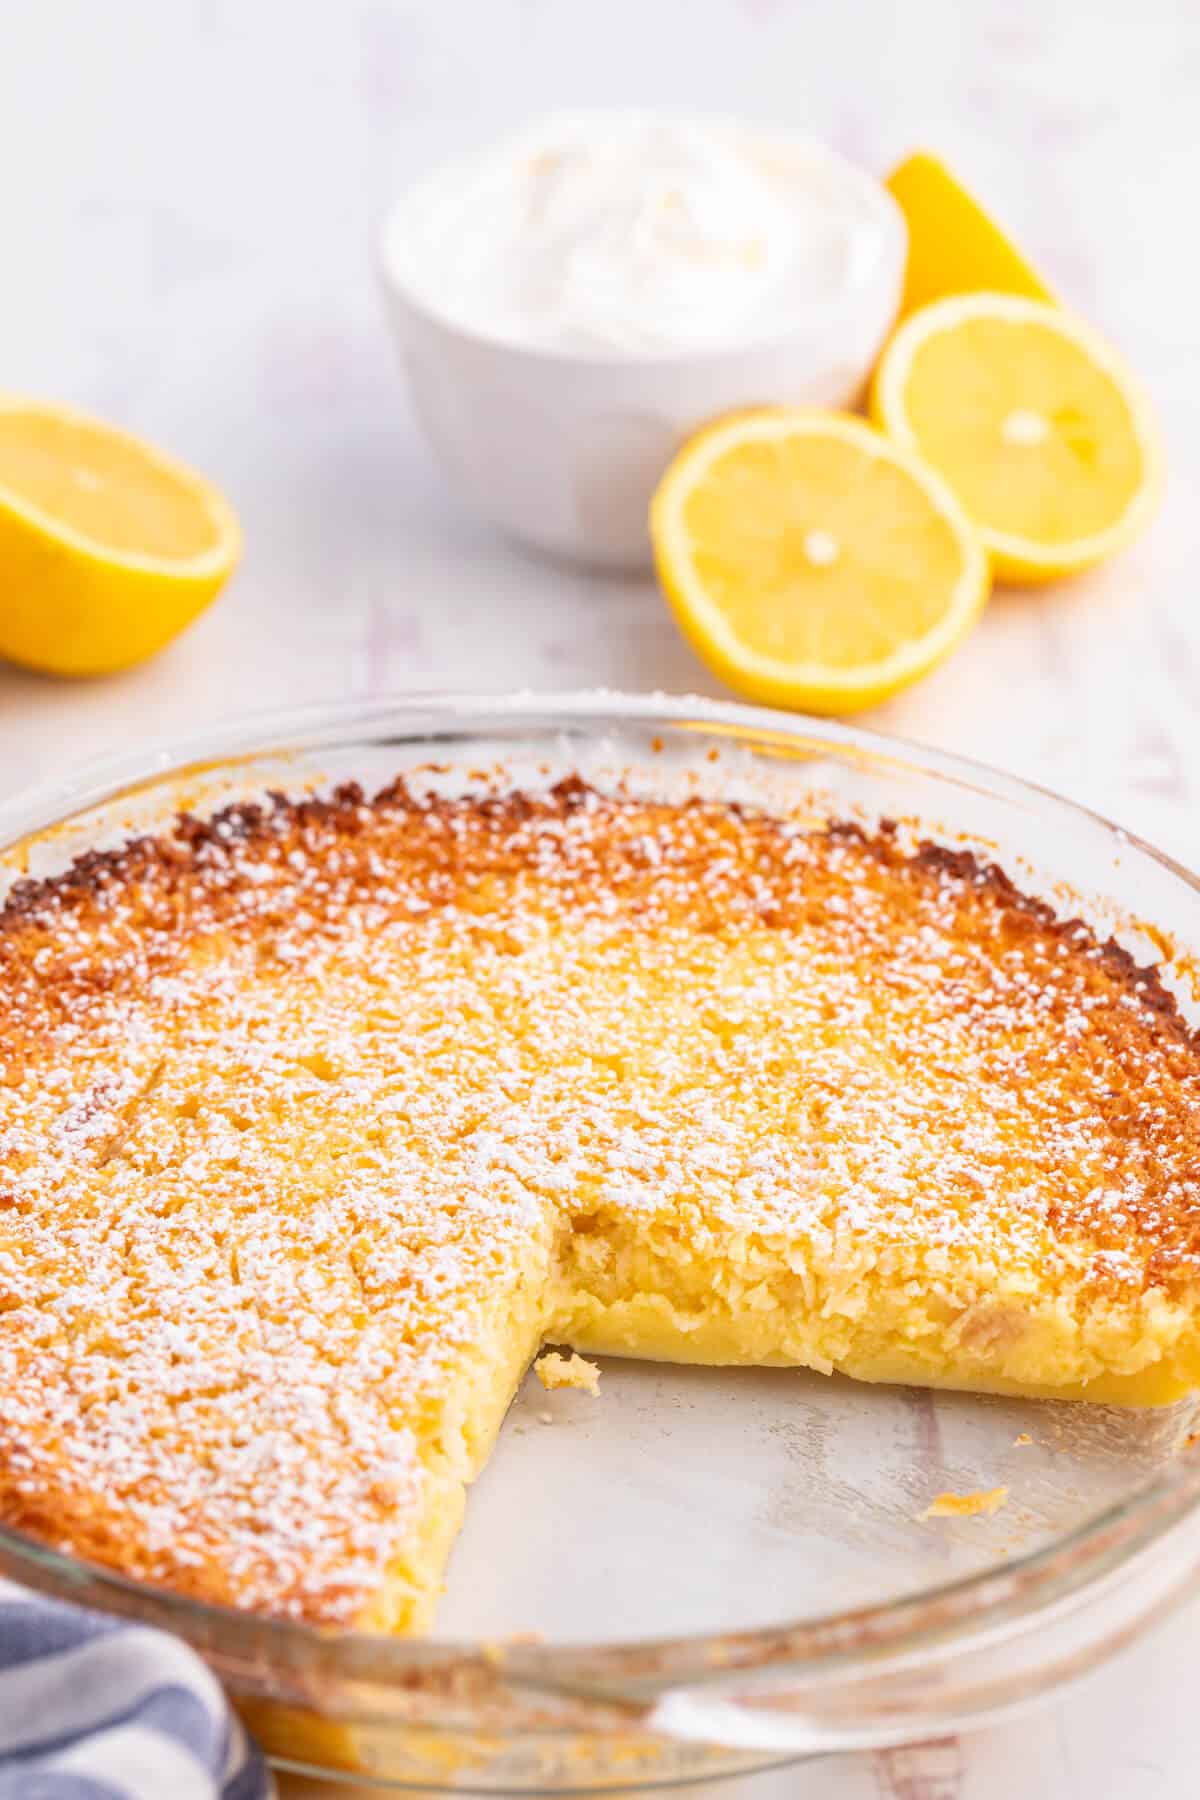 Lemon Impossible Pie with slices removed.